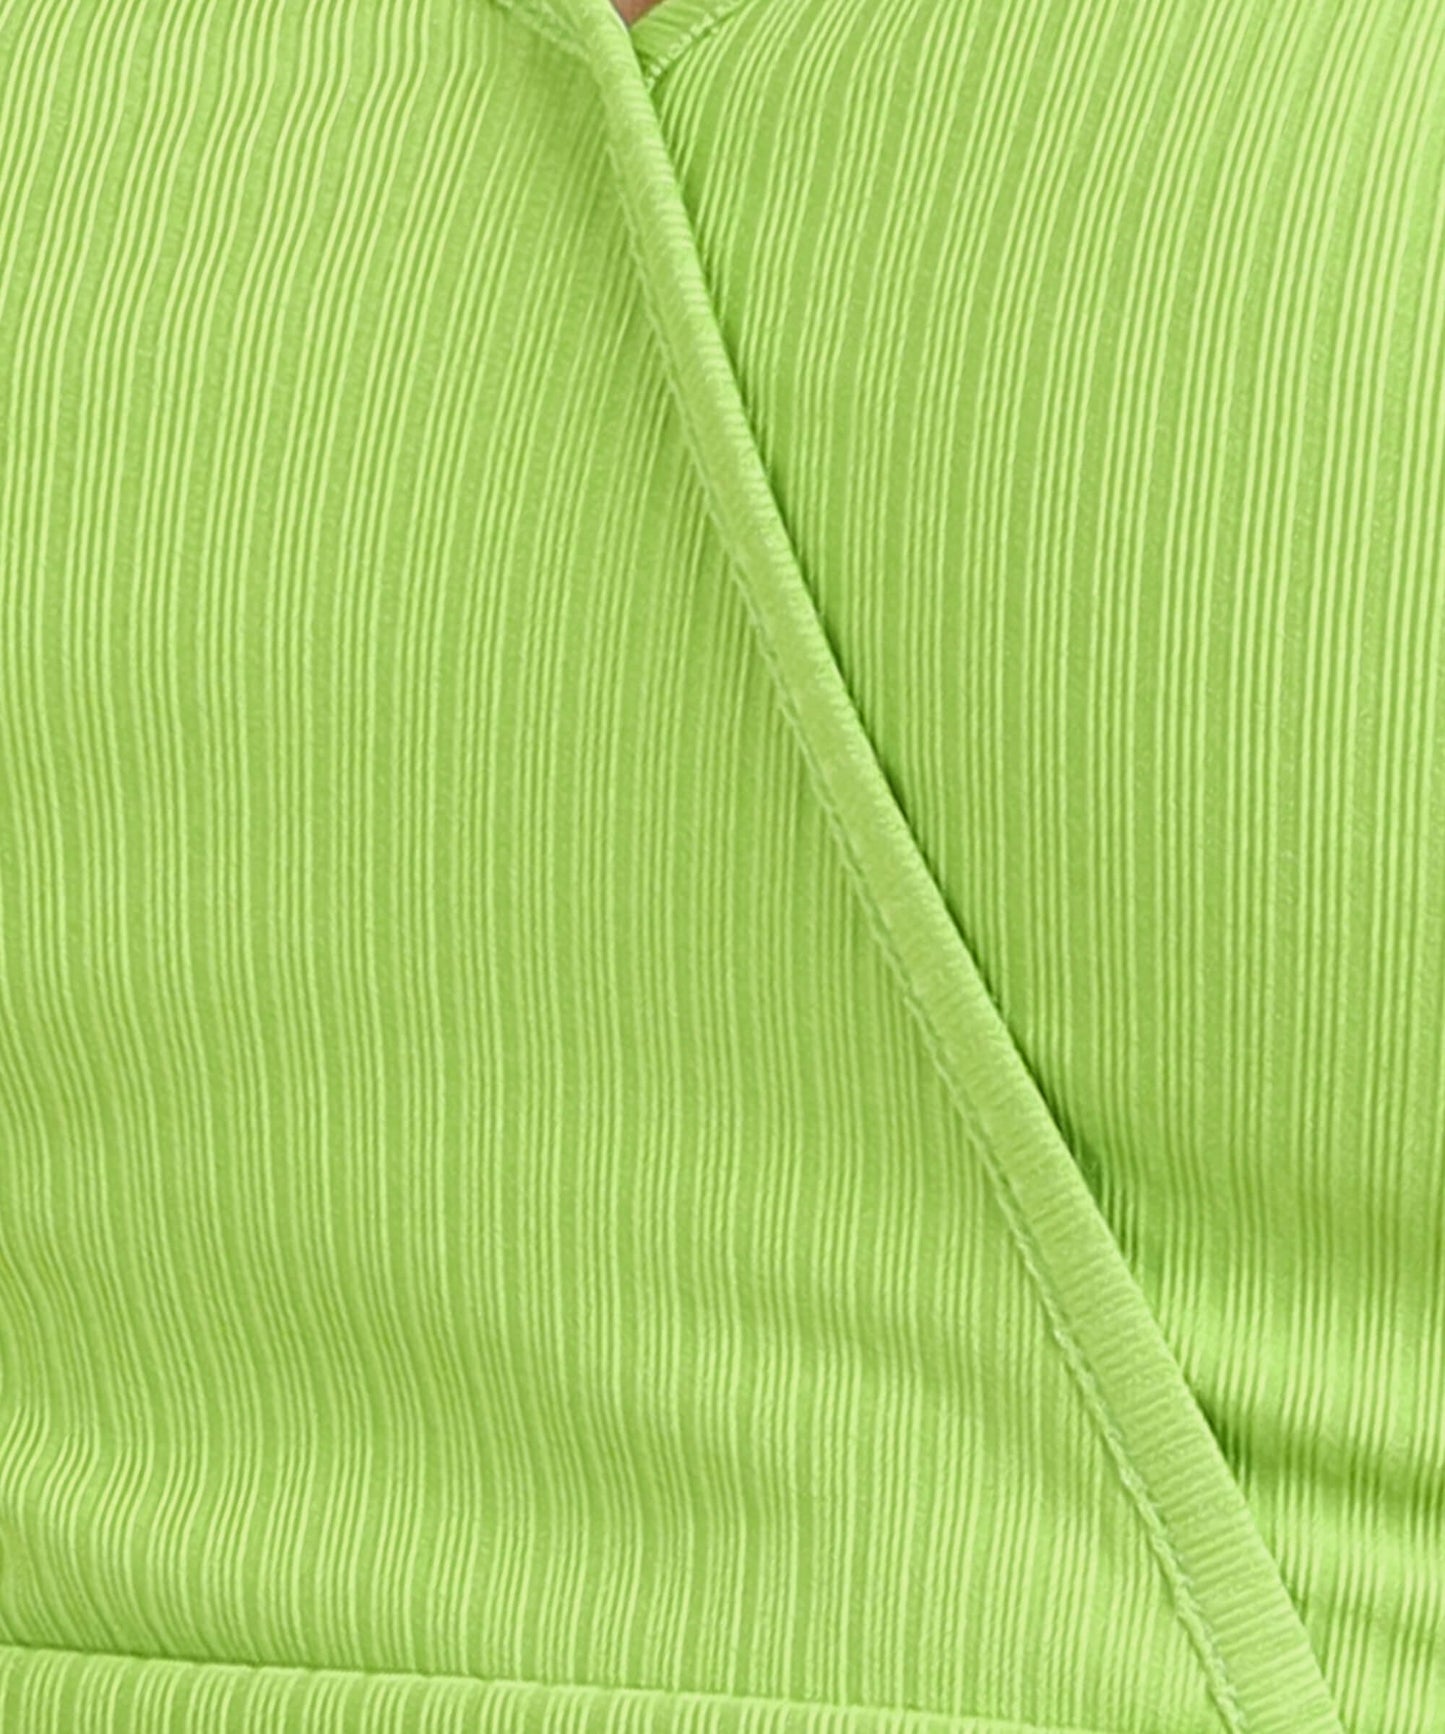 Lime Green